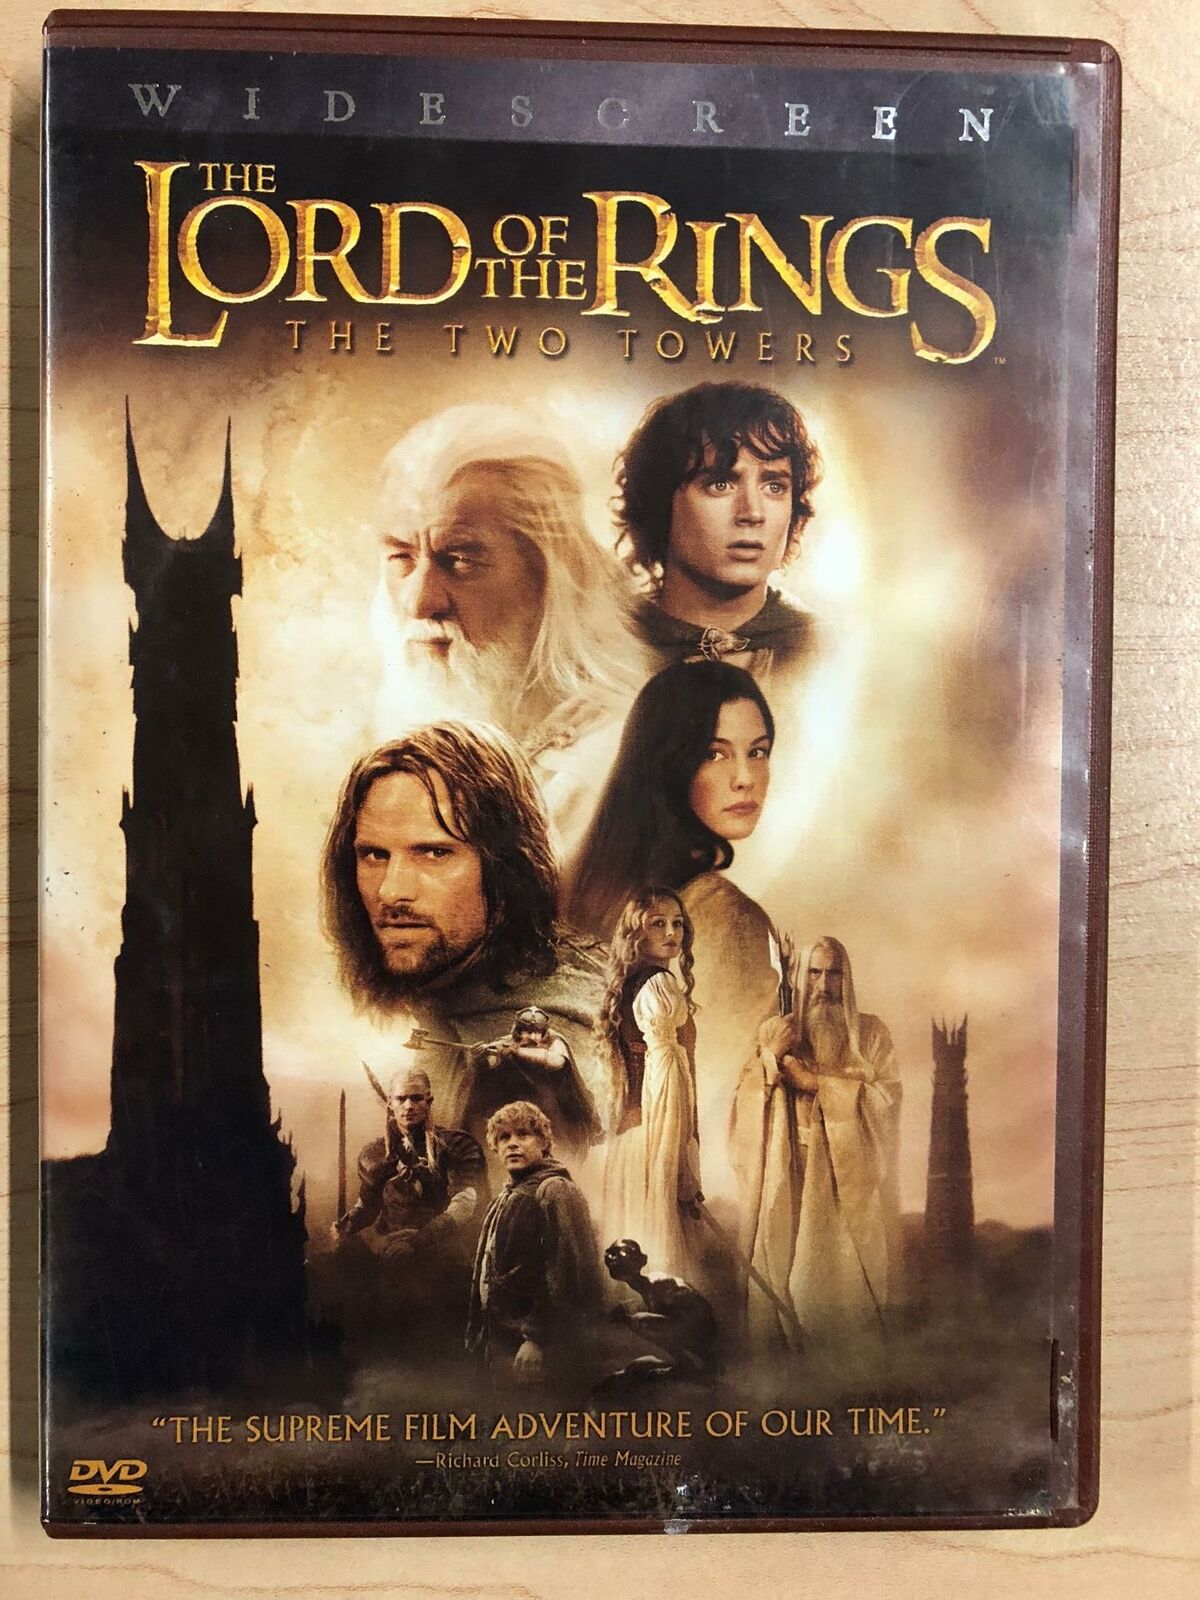 The Lord of the Rings - The Two Towers (DVD, 2002, Widescreen) - G0726